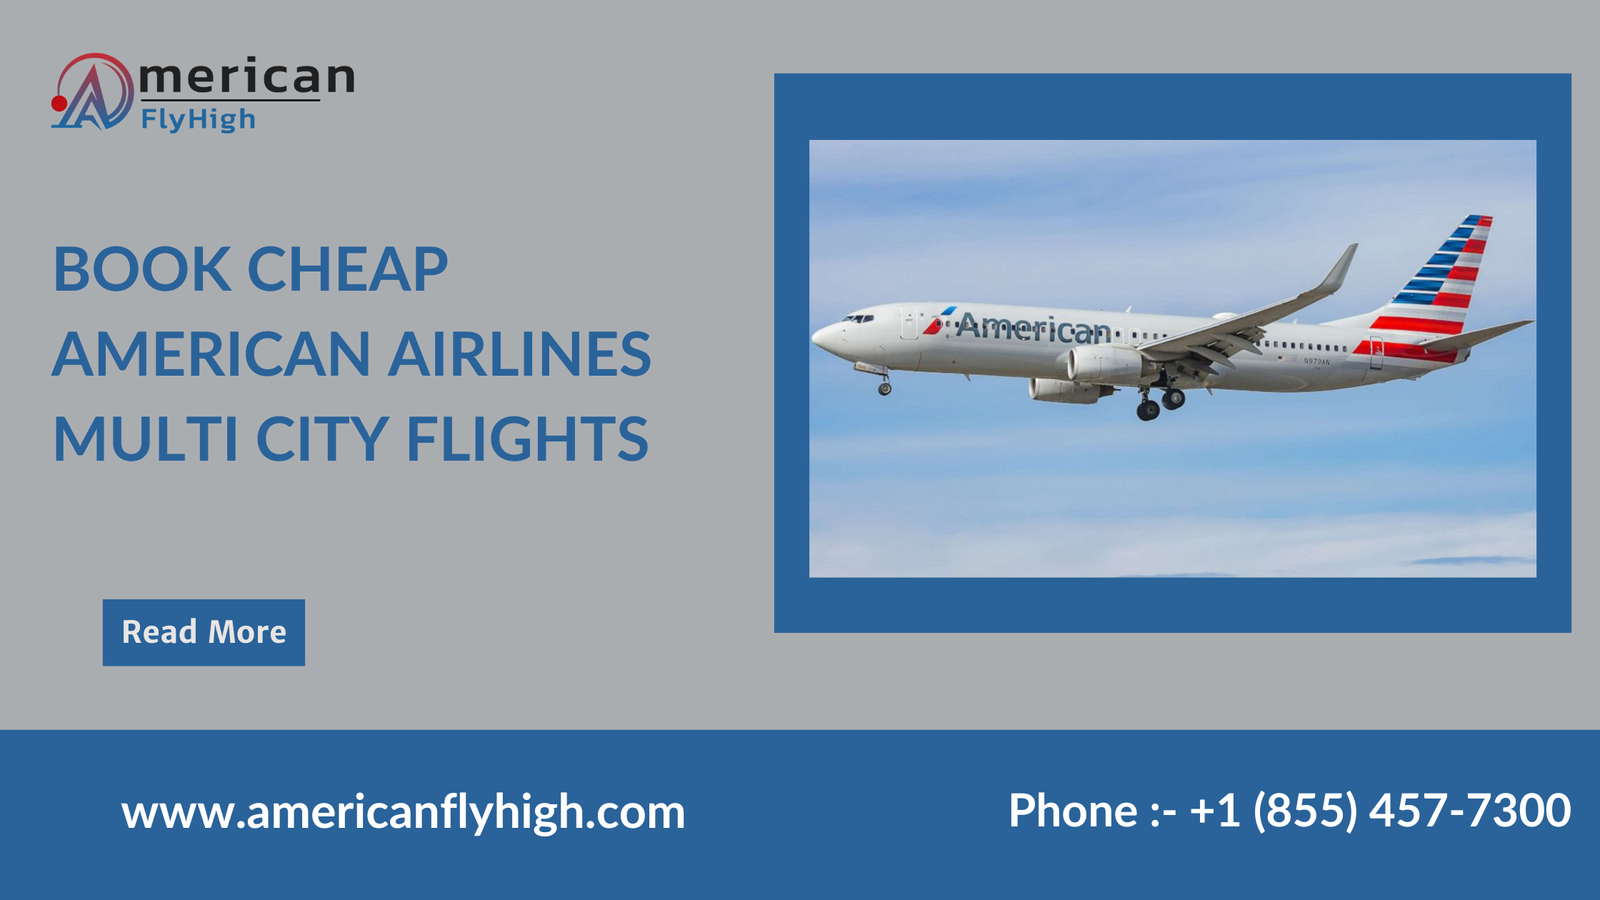 How to book American Airlines Multi City Flights?+1 (855) 457-7300